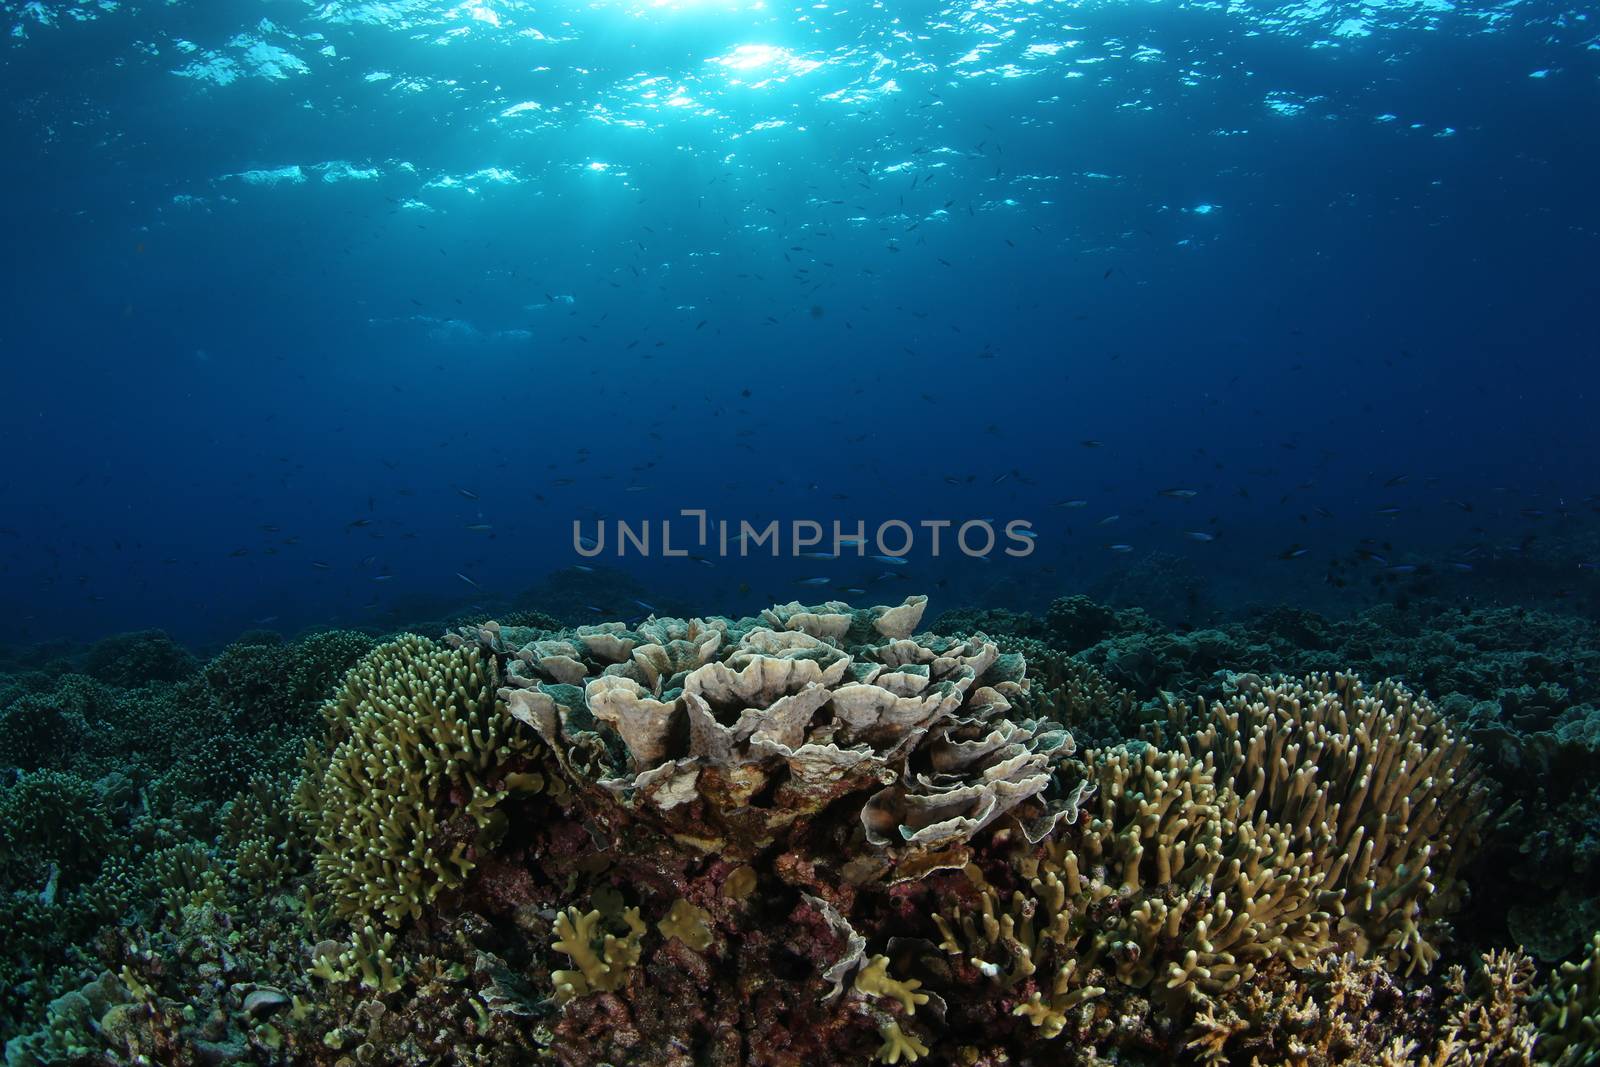 coral life diving Underwater Papua New Guinea Pacific Ocean